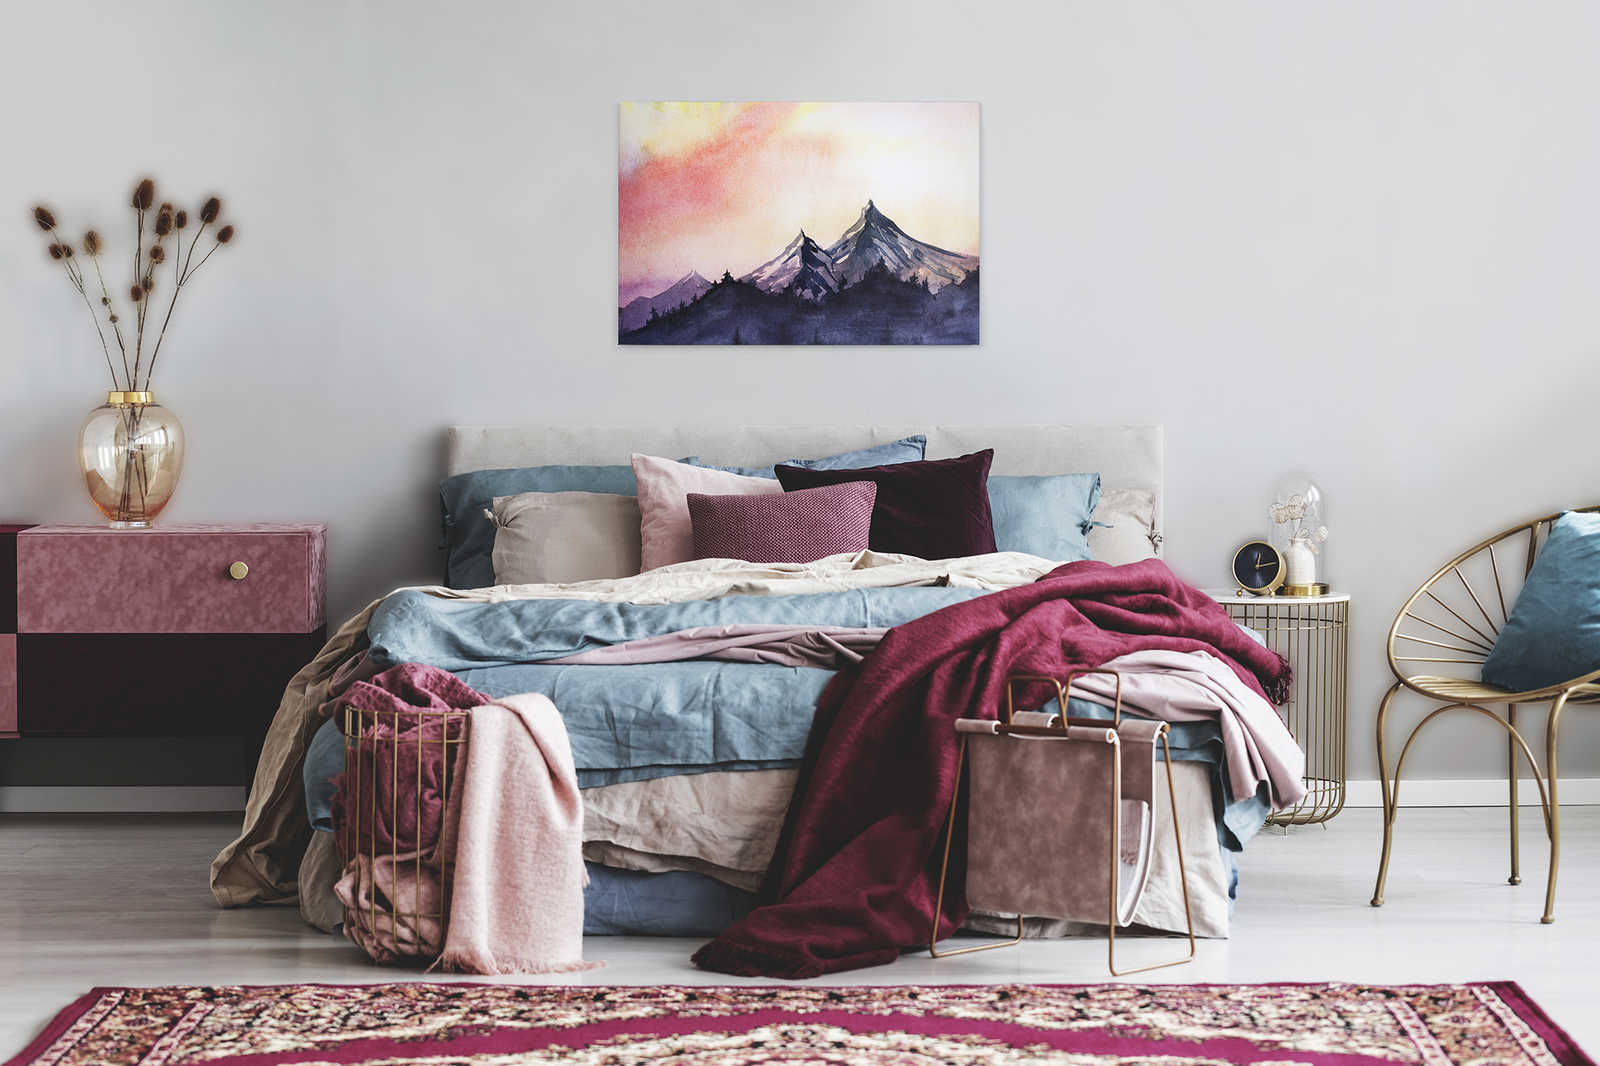             Canvas wall with mountain landscape in watercolour style - 0.90 m x 0.60 m
        